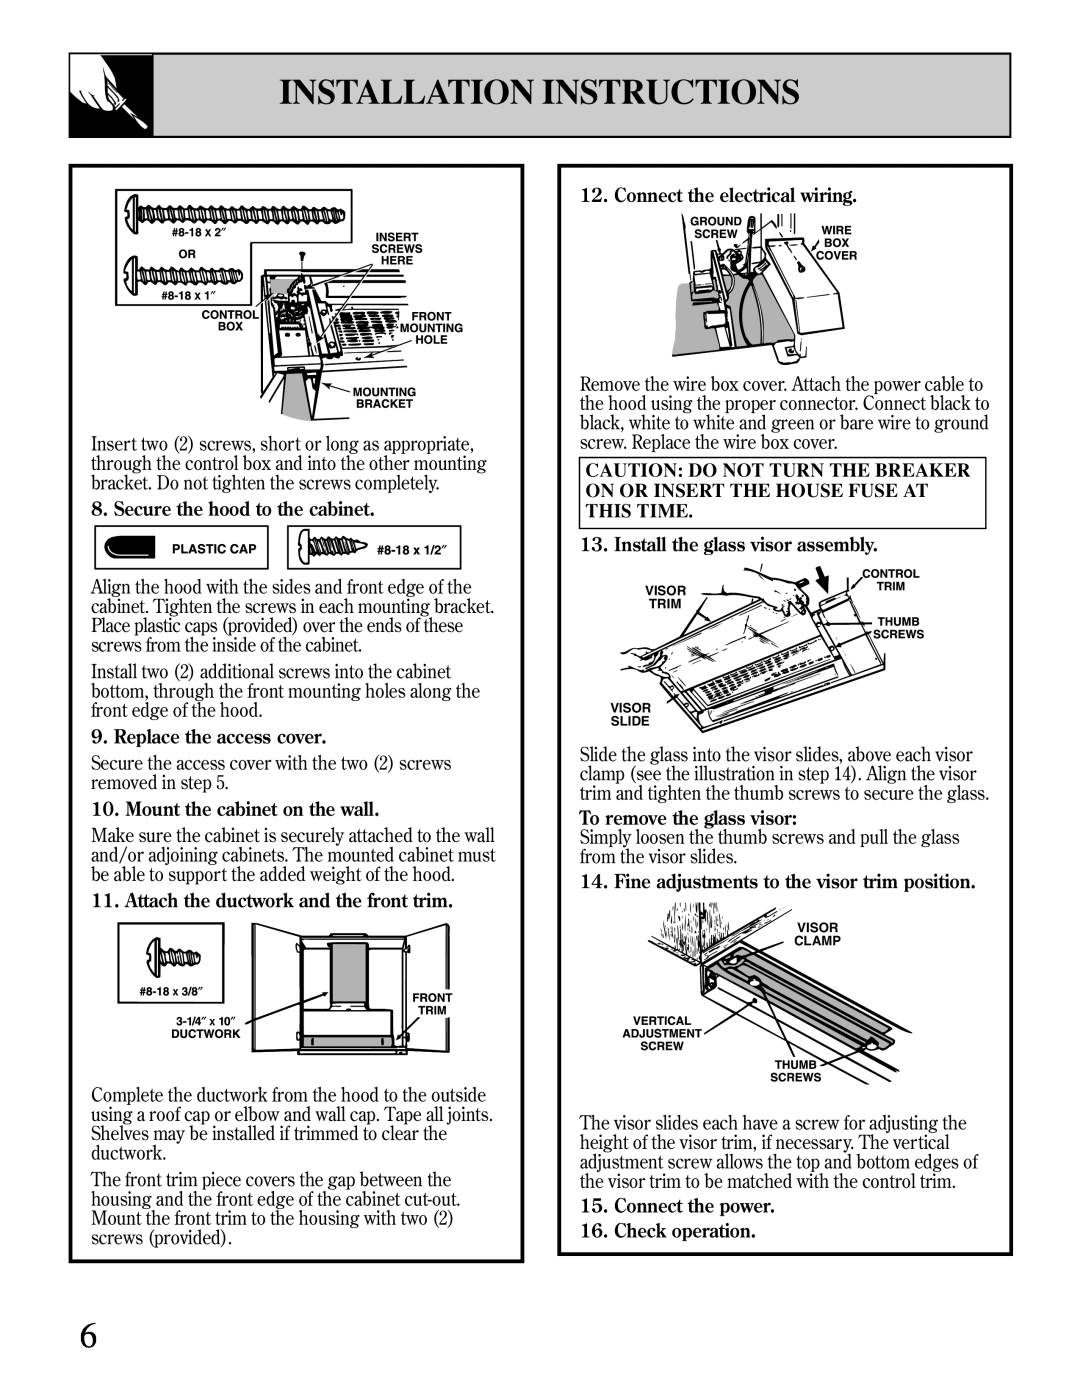 GE JV394, JV930, JV396, JV395 operating instructions Installation Instructions, Secure the hood to the cabinet 